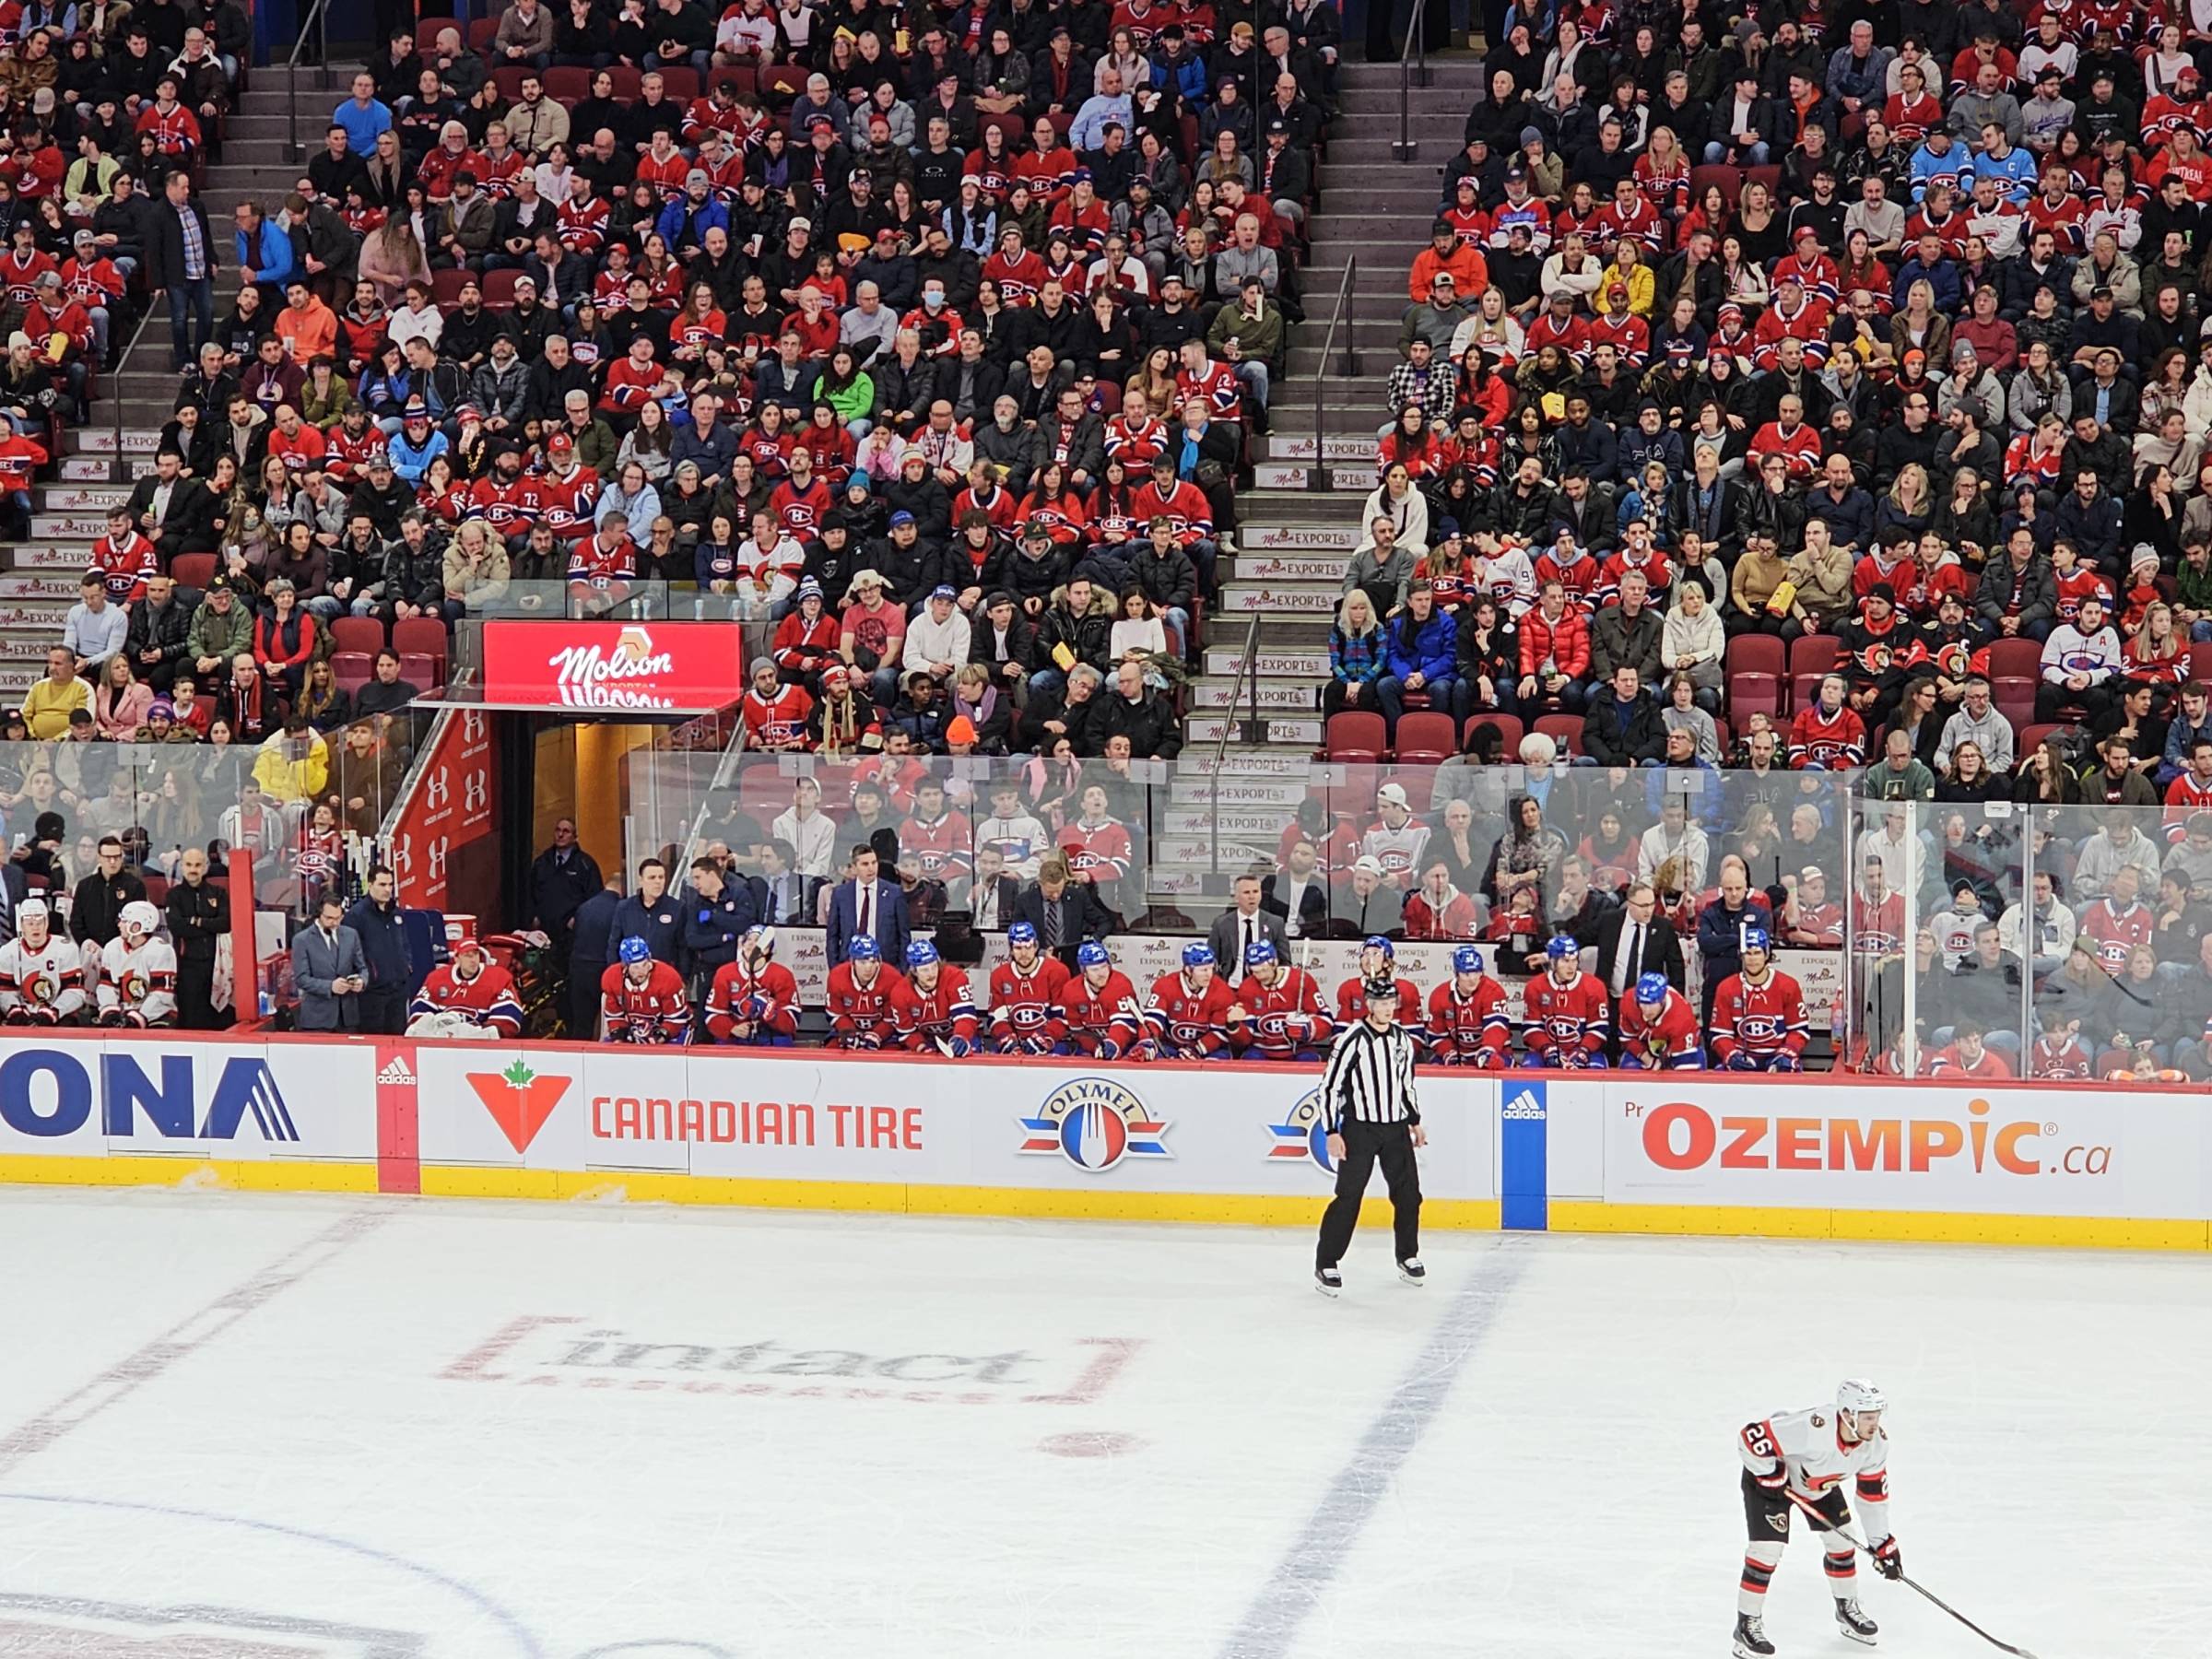 Home Bench at the Bell Centre